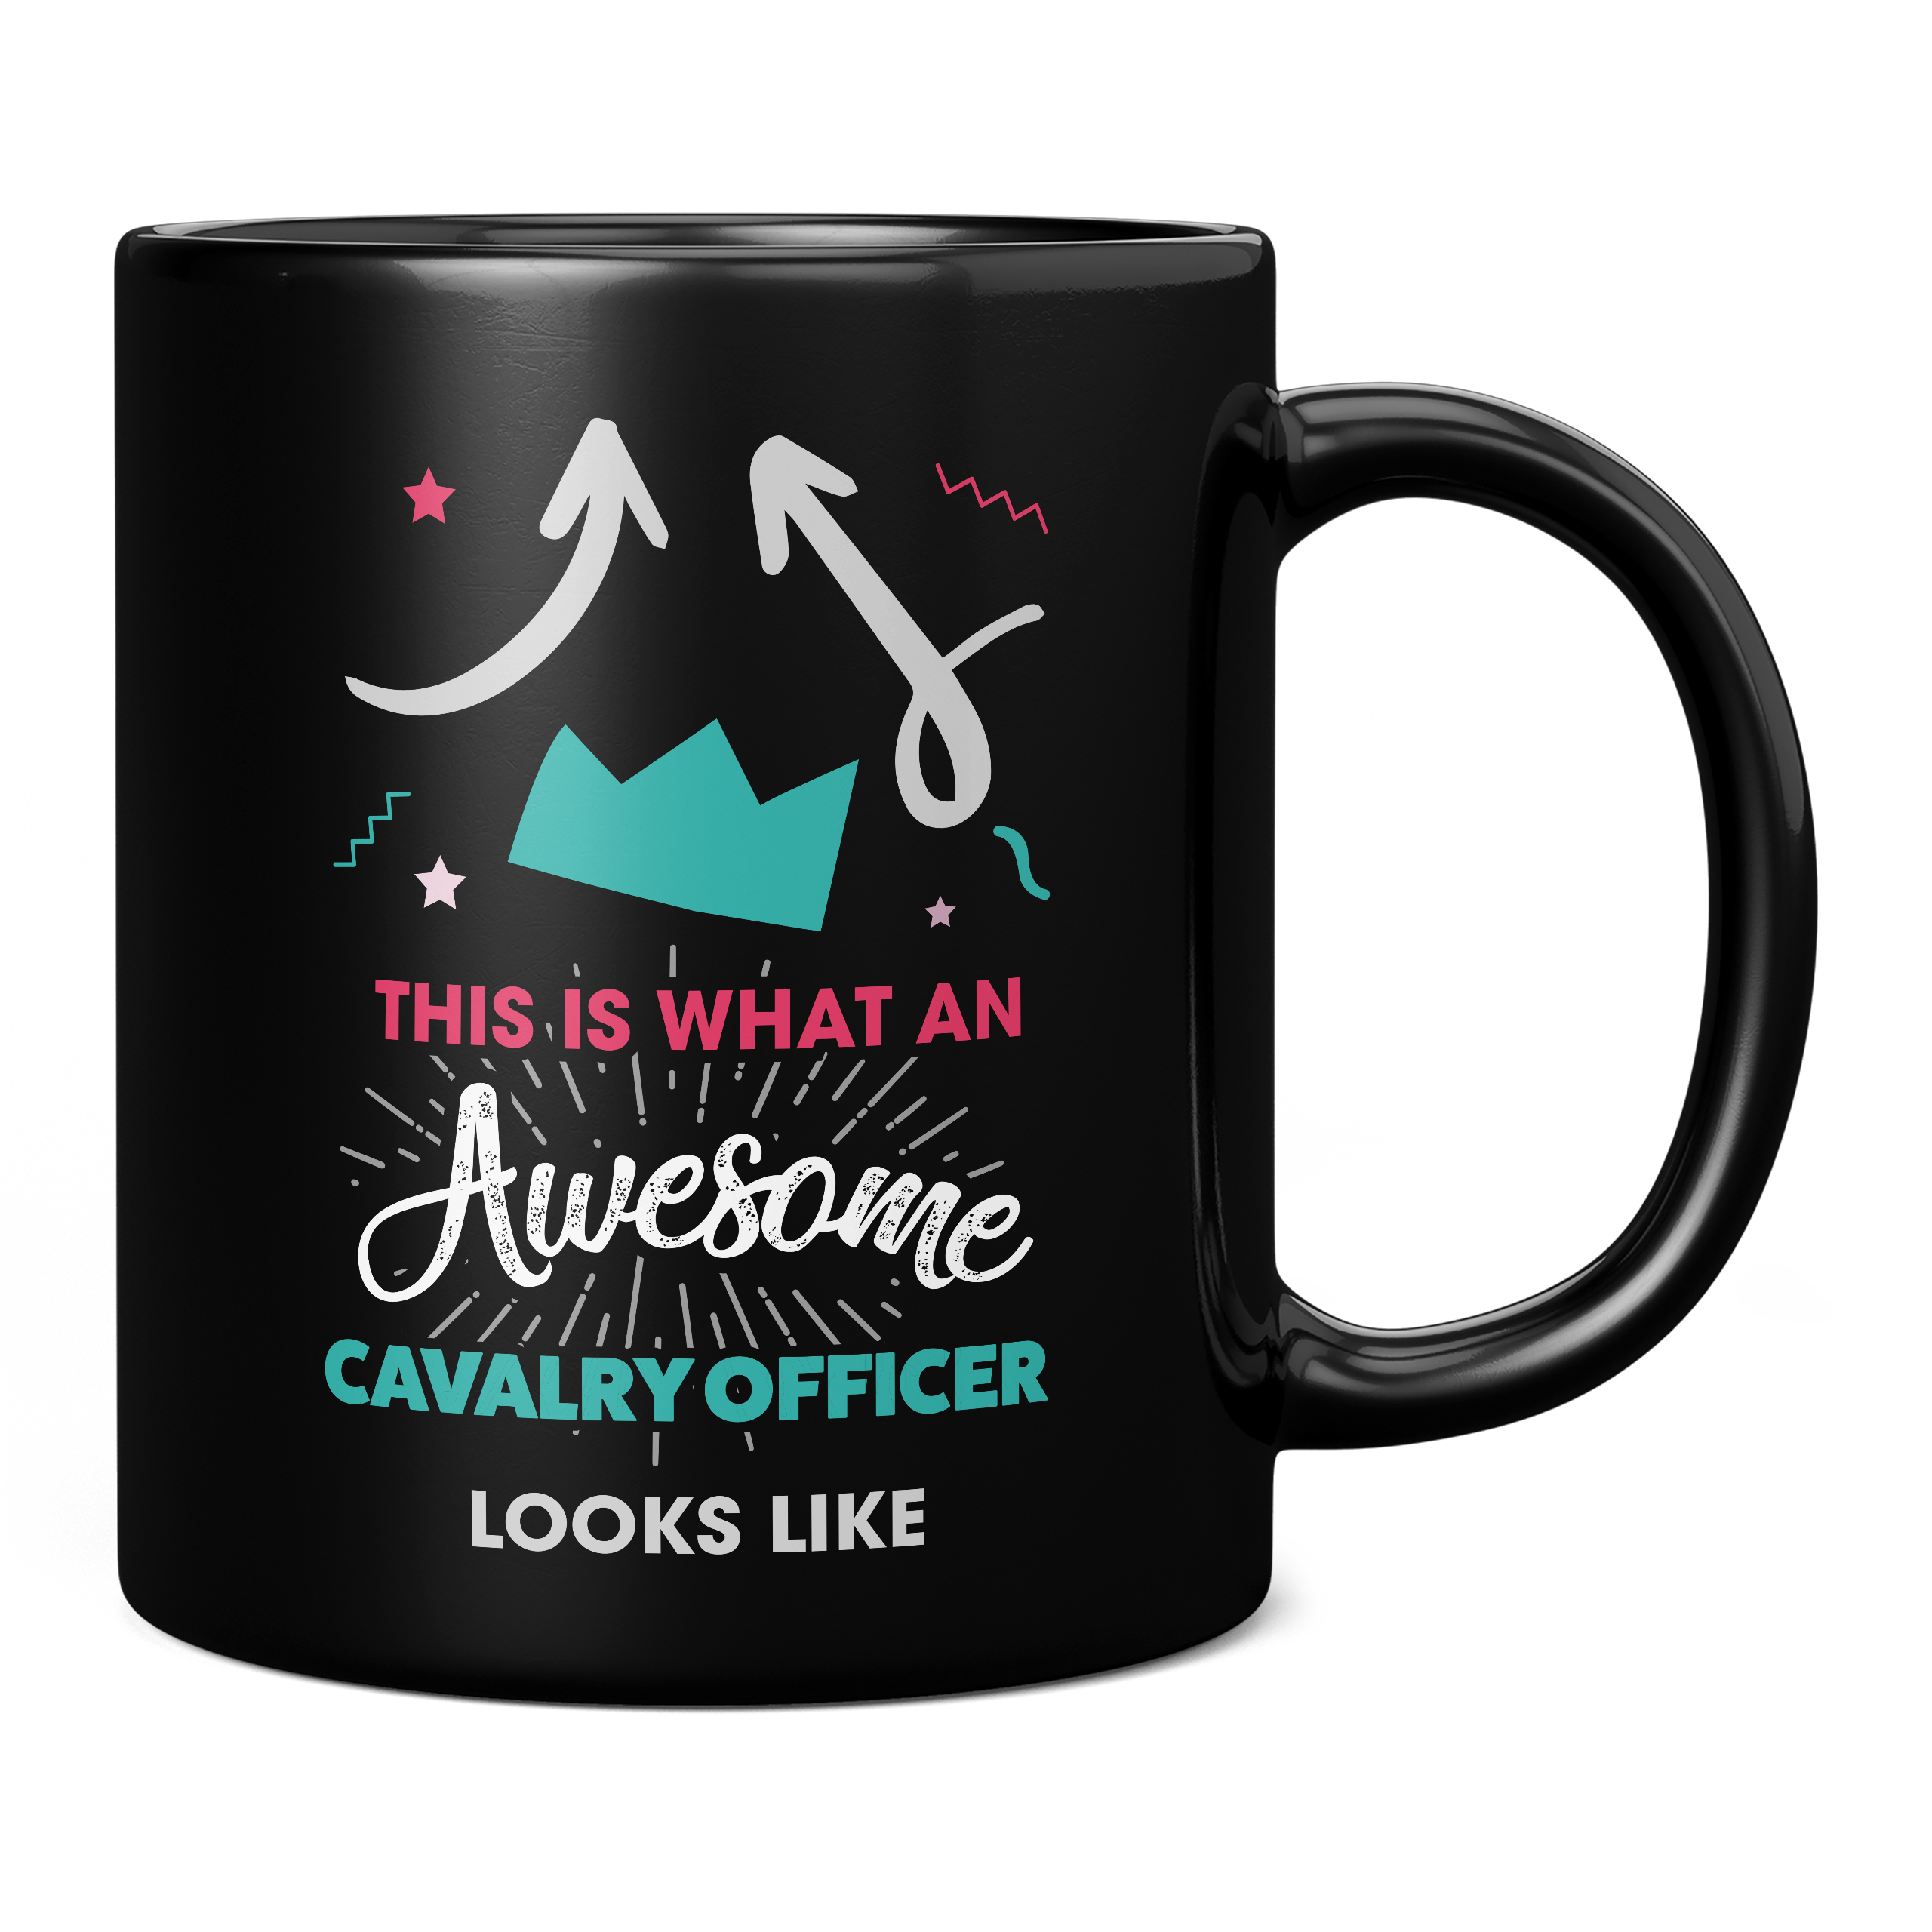 THIS IS WHAT AN AWESOME CAVALRY OFFICER LOOKS LIKE 11OZ NOVELTY MUG